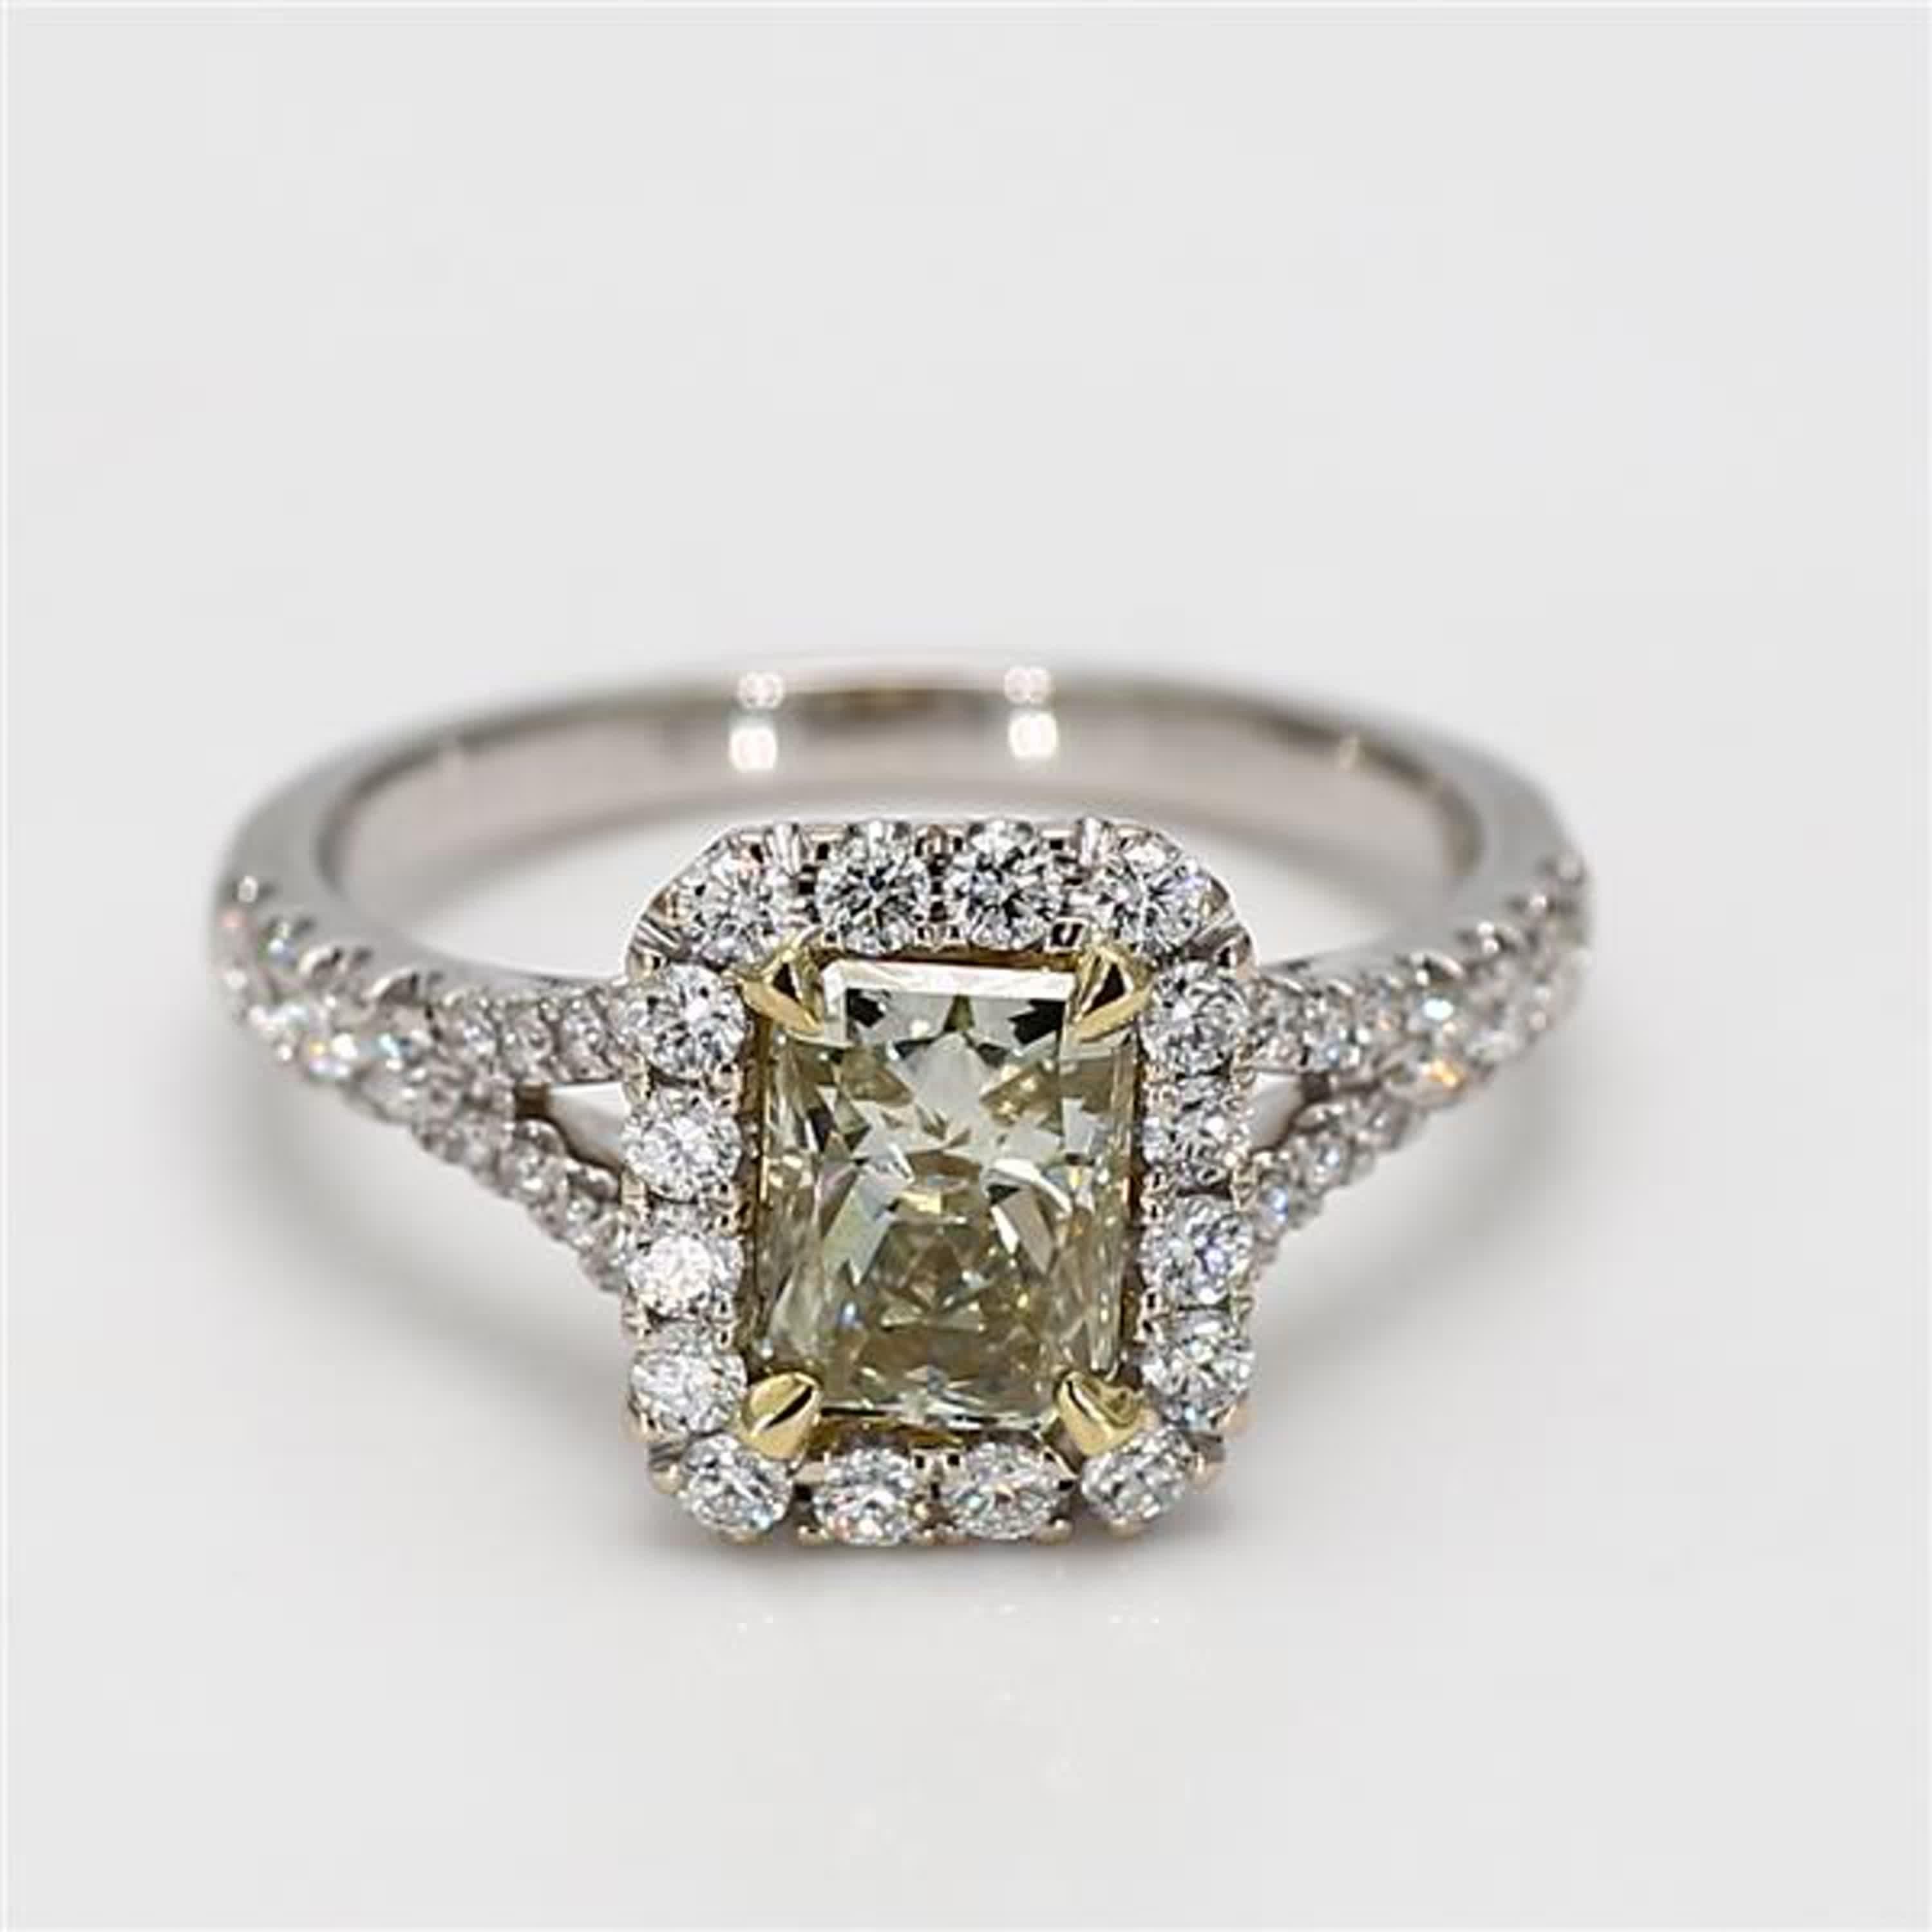 RareGemWorld's classic GIA certified diamond ring. Mounted in a beautiful 18K Yellow and White Gold setting with a natural radiant cut yellow diamond. The yellow diamond is surrounded by small round natural white diamond melee. This ring is